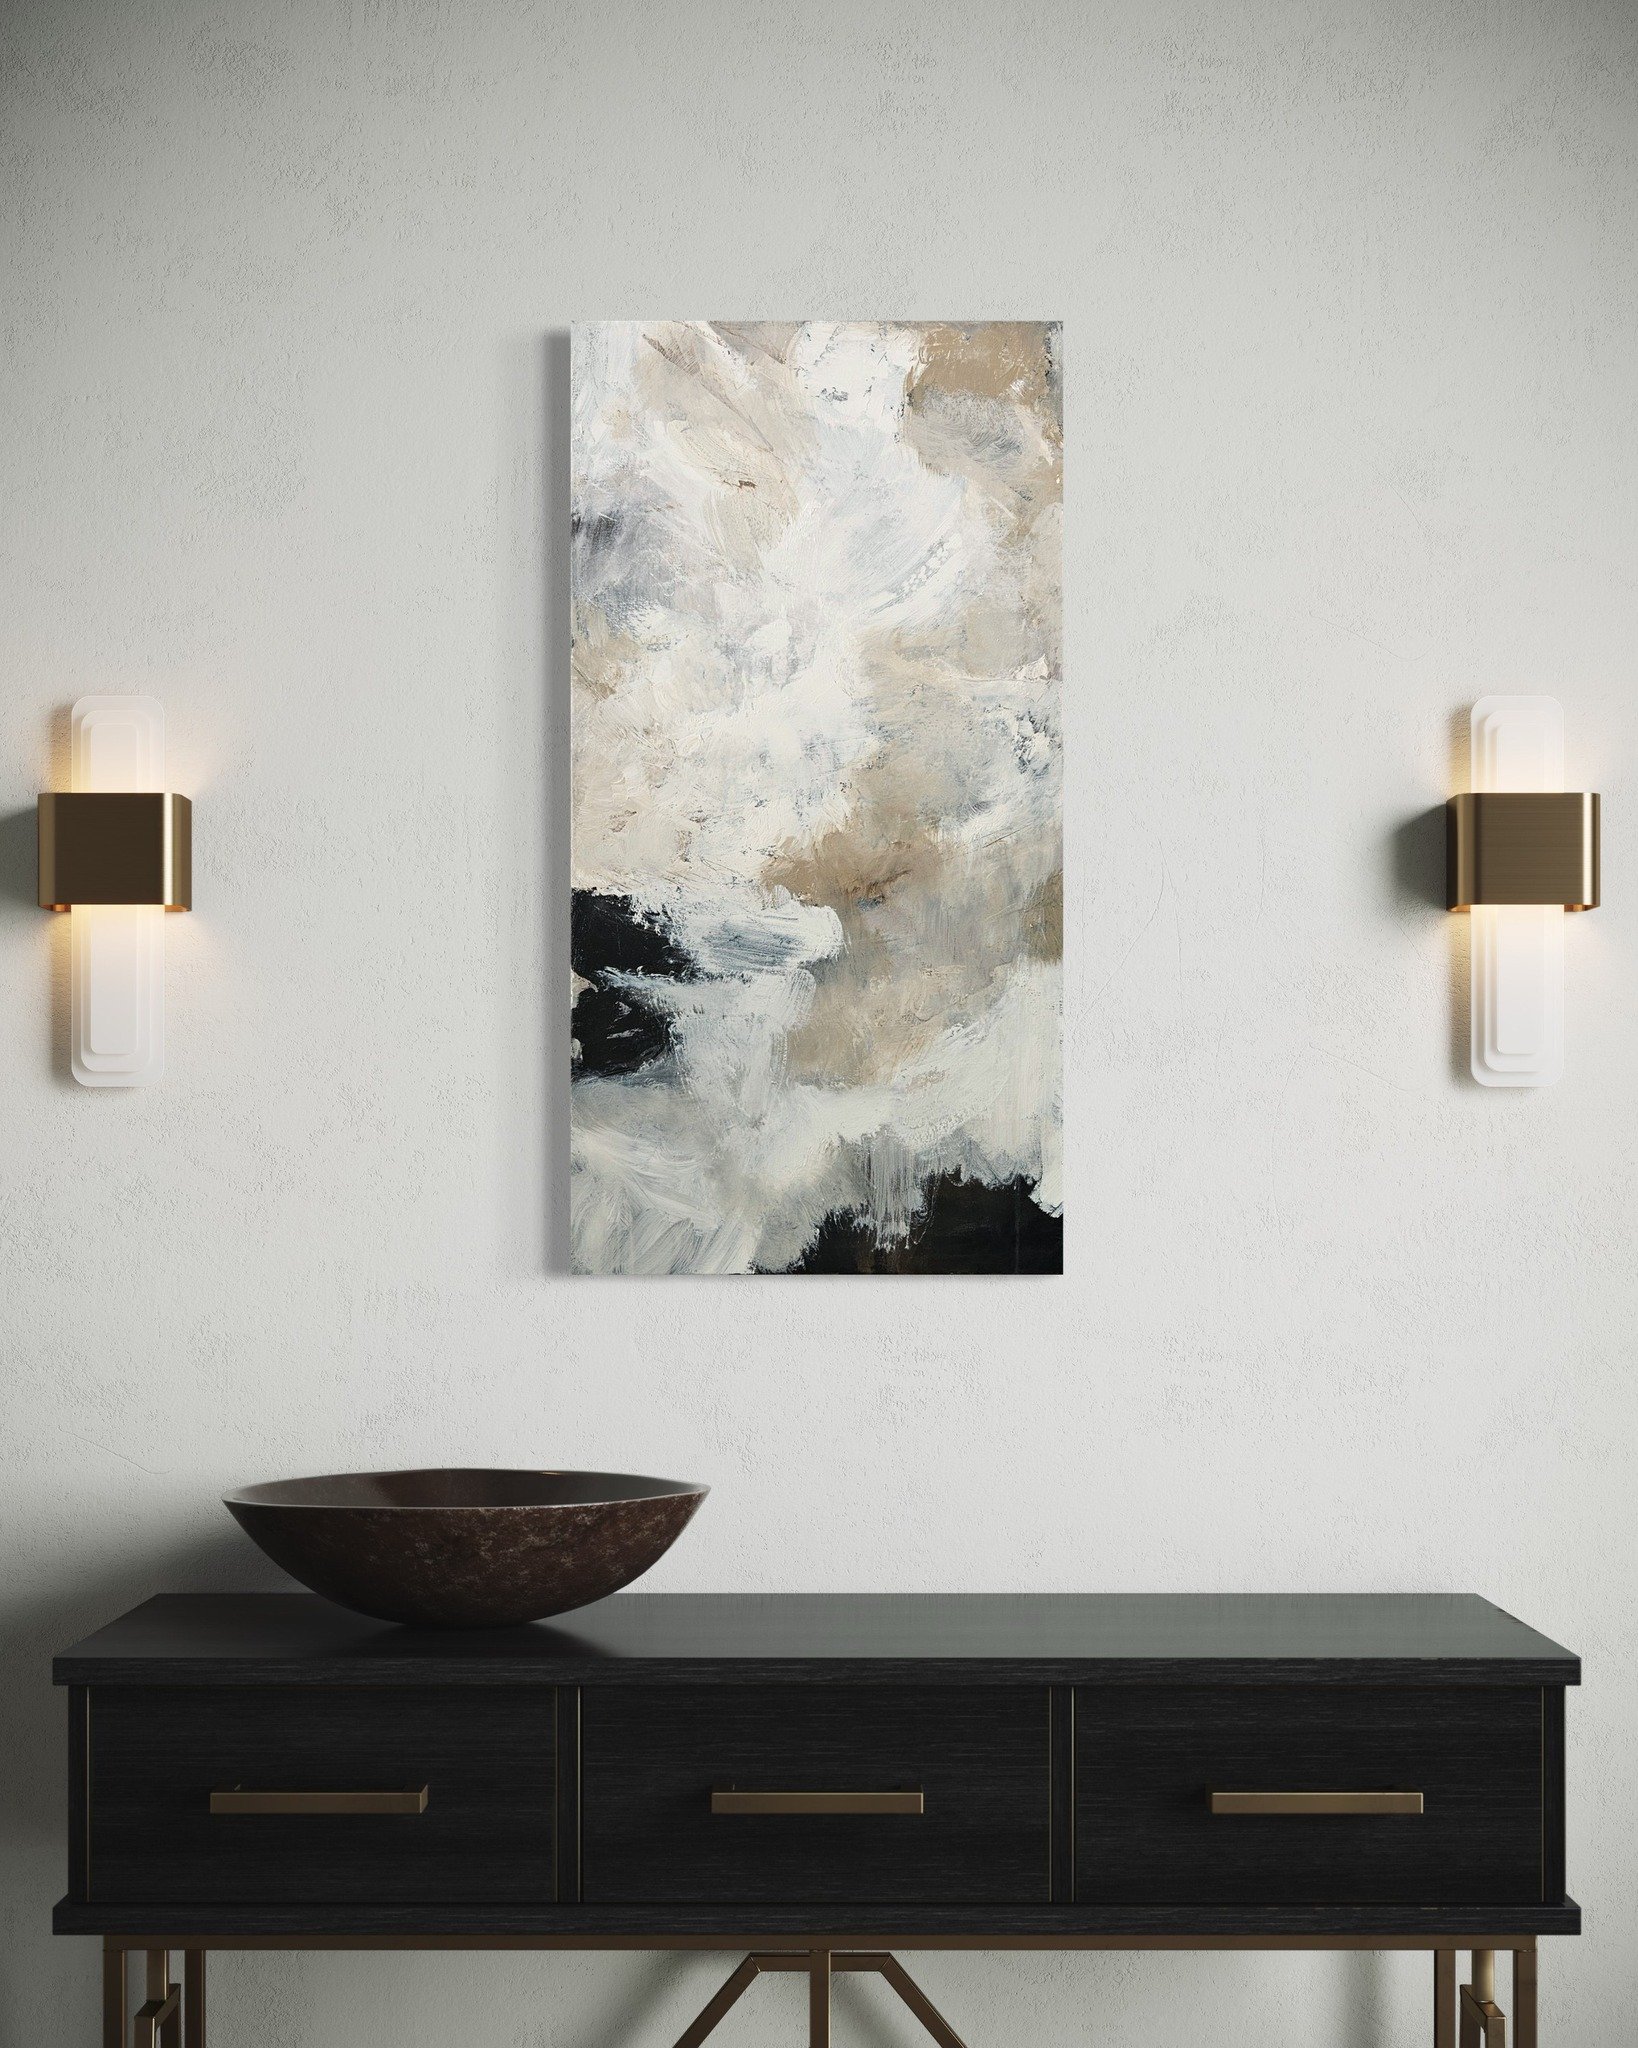 New from local abstract artist Lauren Ottley. The perfect piece for a small space or as a compliment on an adjacent wall to an existing work of art.

The neutral tones harmonize with other neutral works or balance works of art that are more bold or v